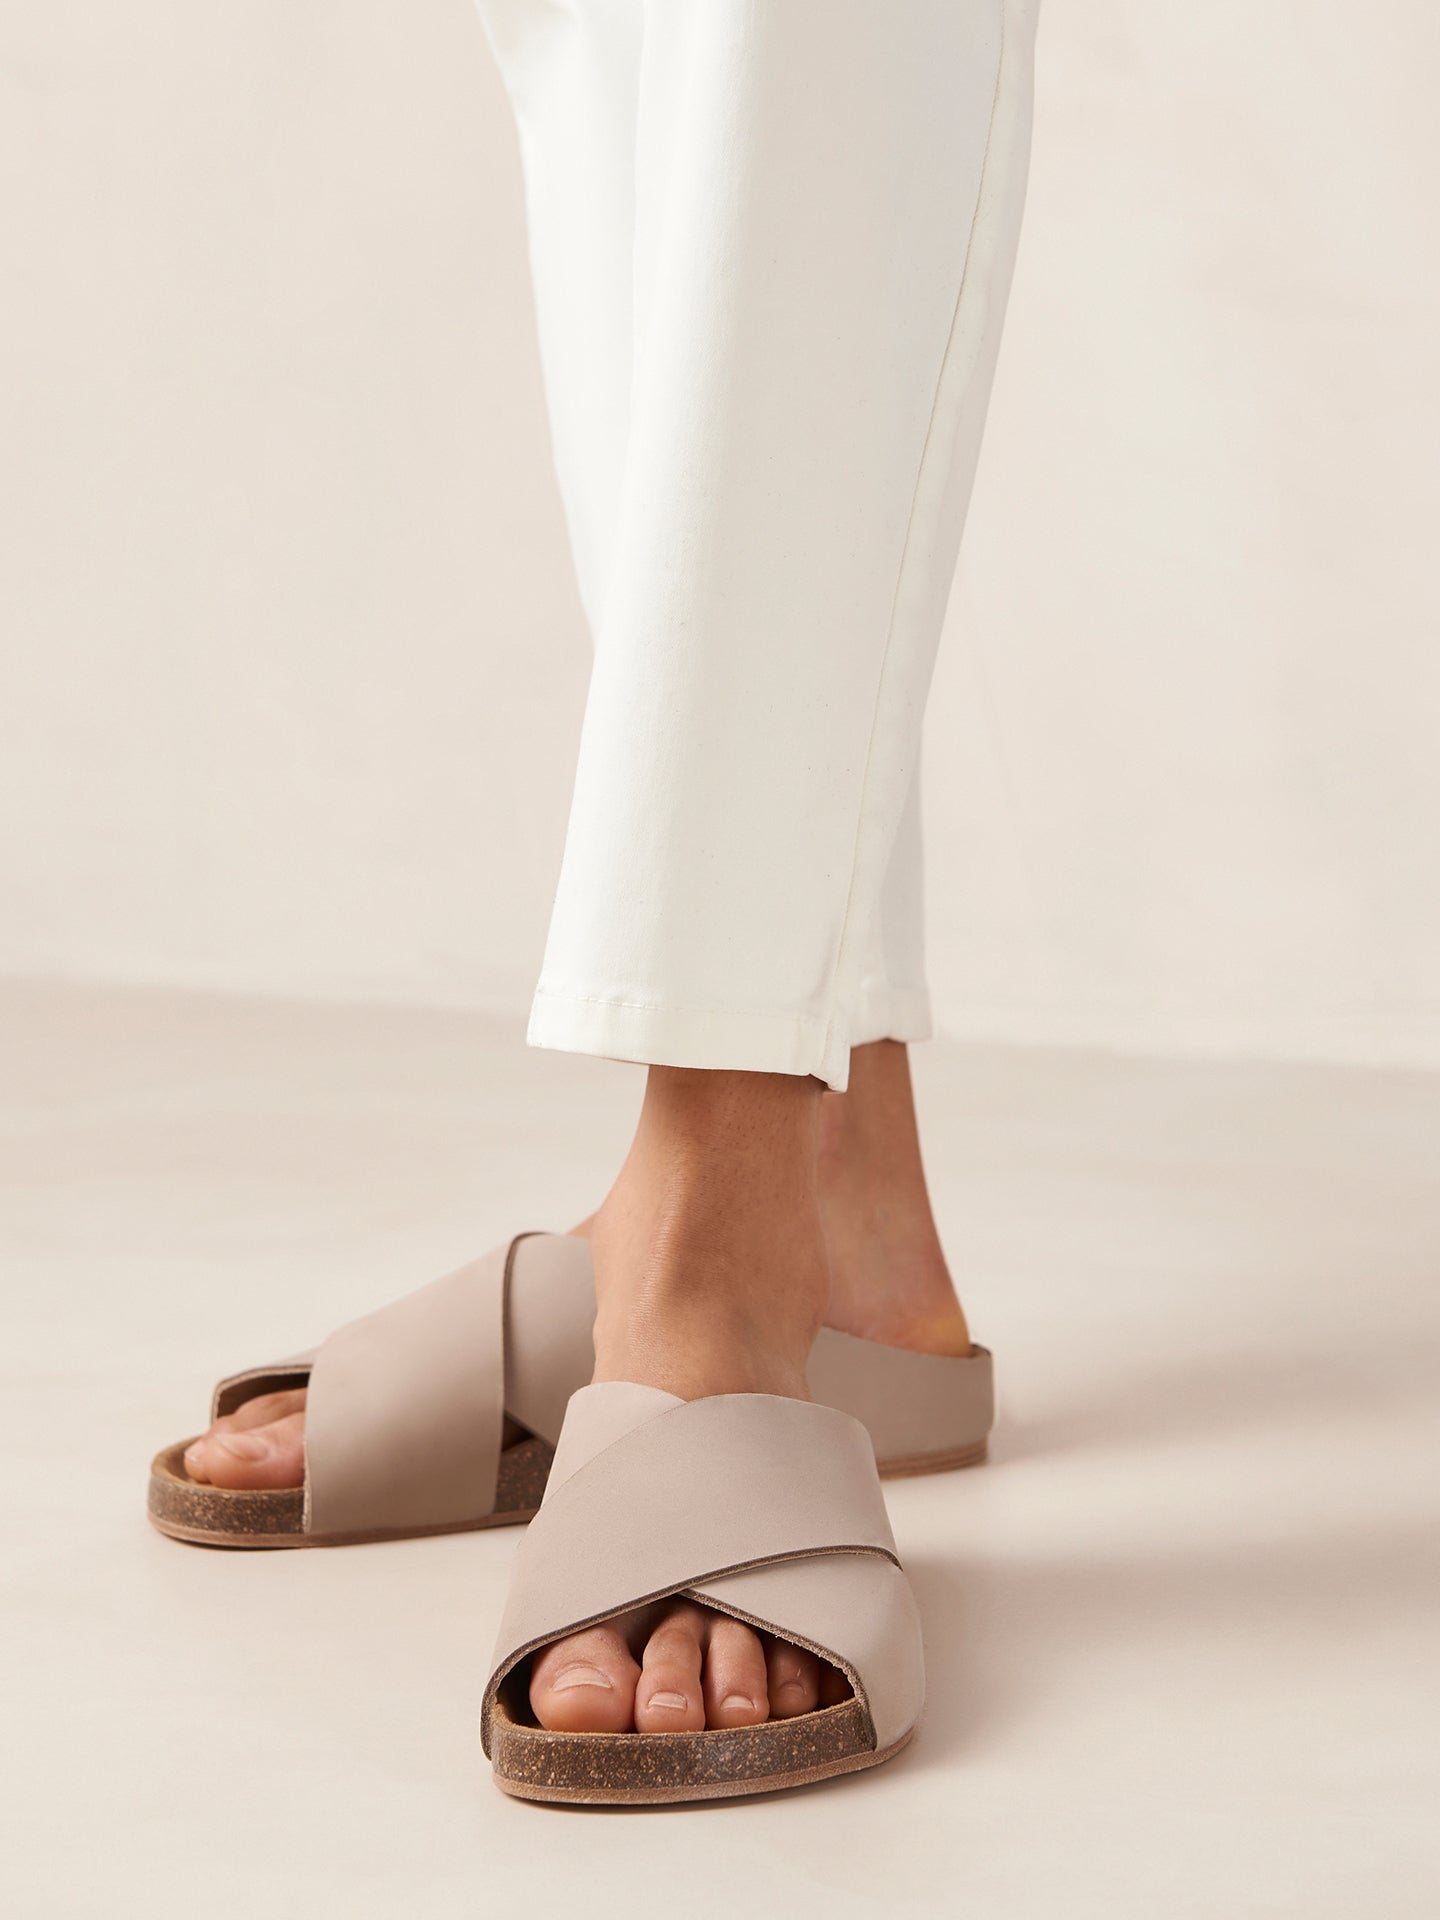 The Briar Leather Sandal is the perfect summer slide to slip on before and after a workout. These comfortable shoes will take you anywhere. Sustainably made in Spain.